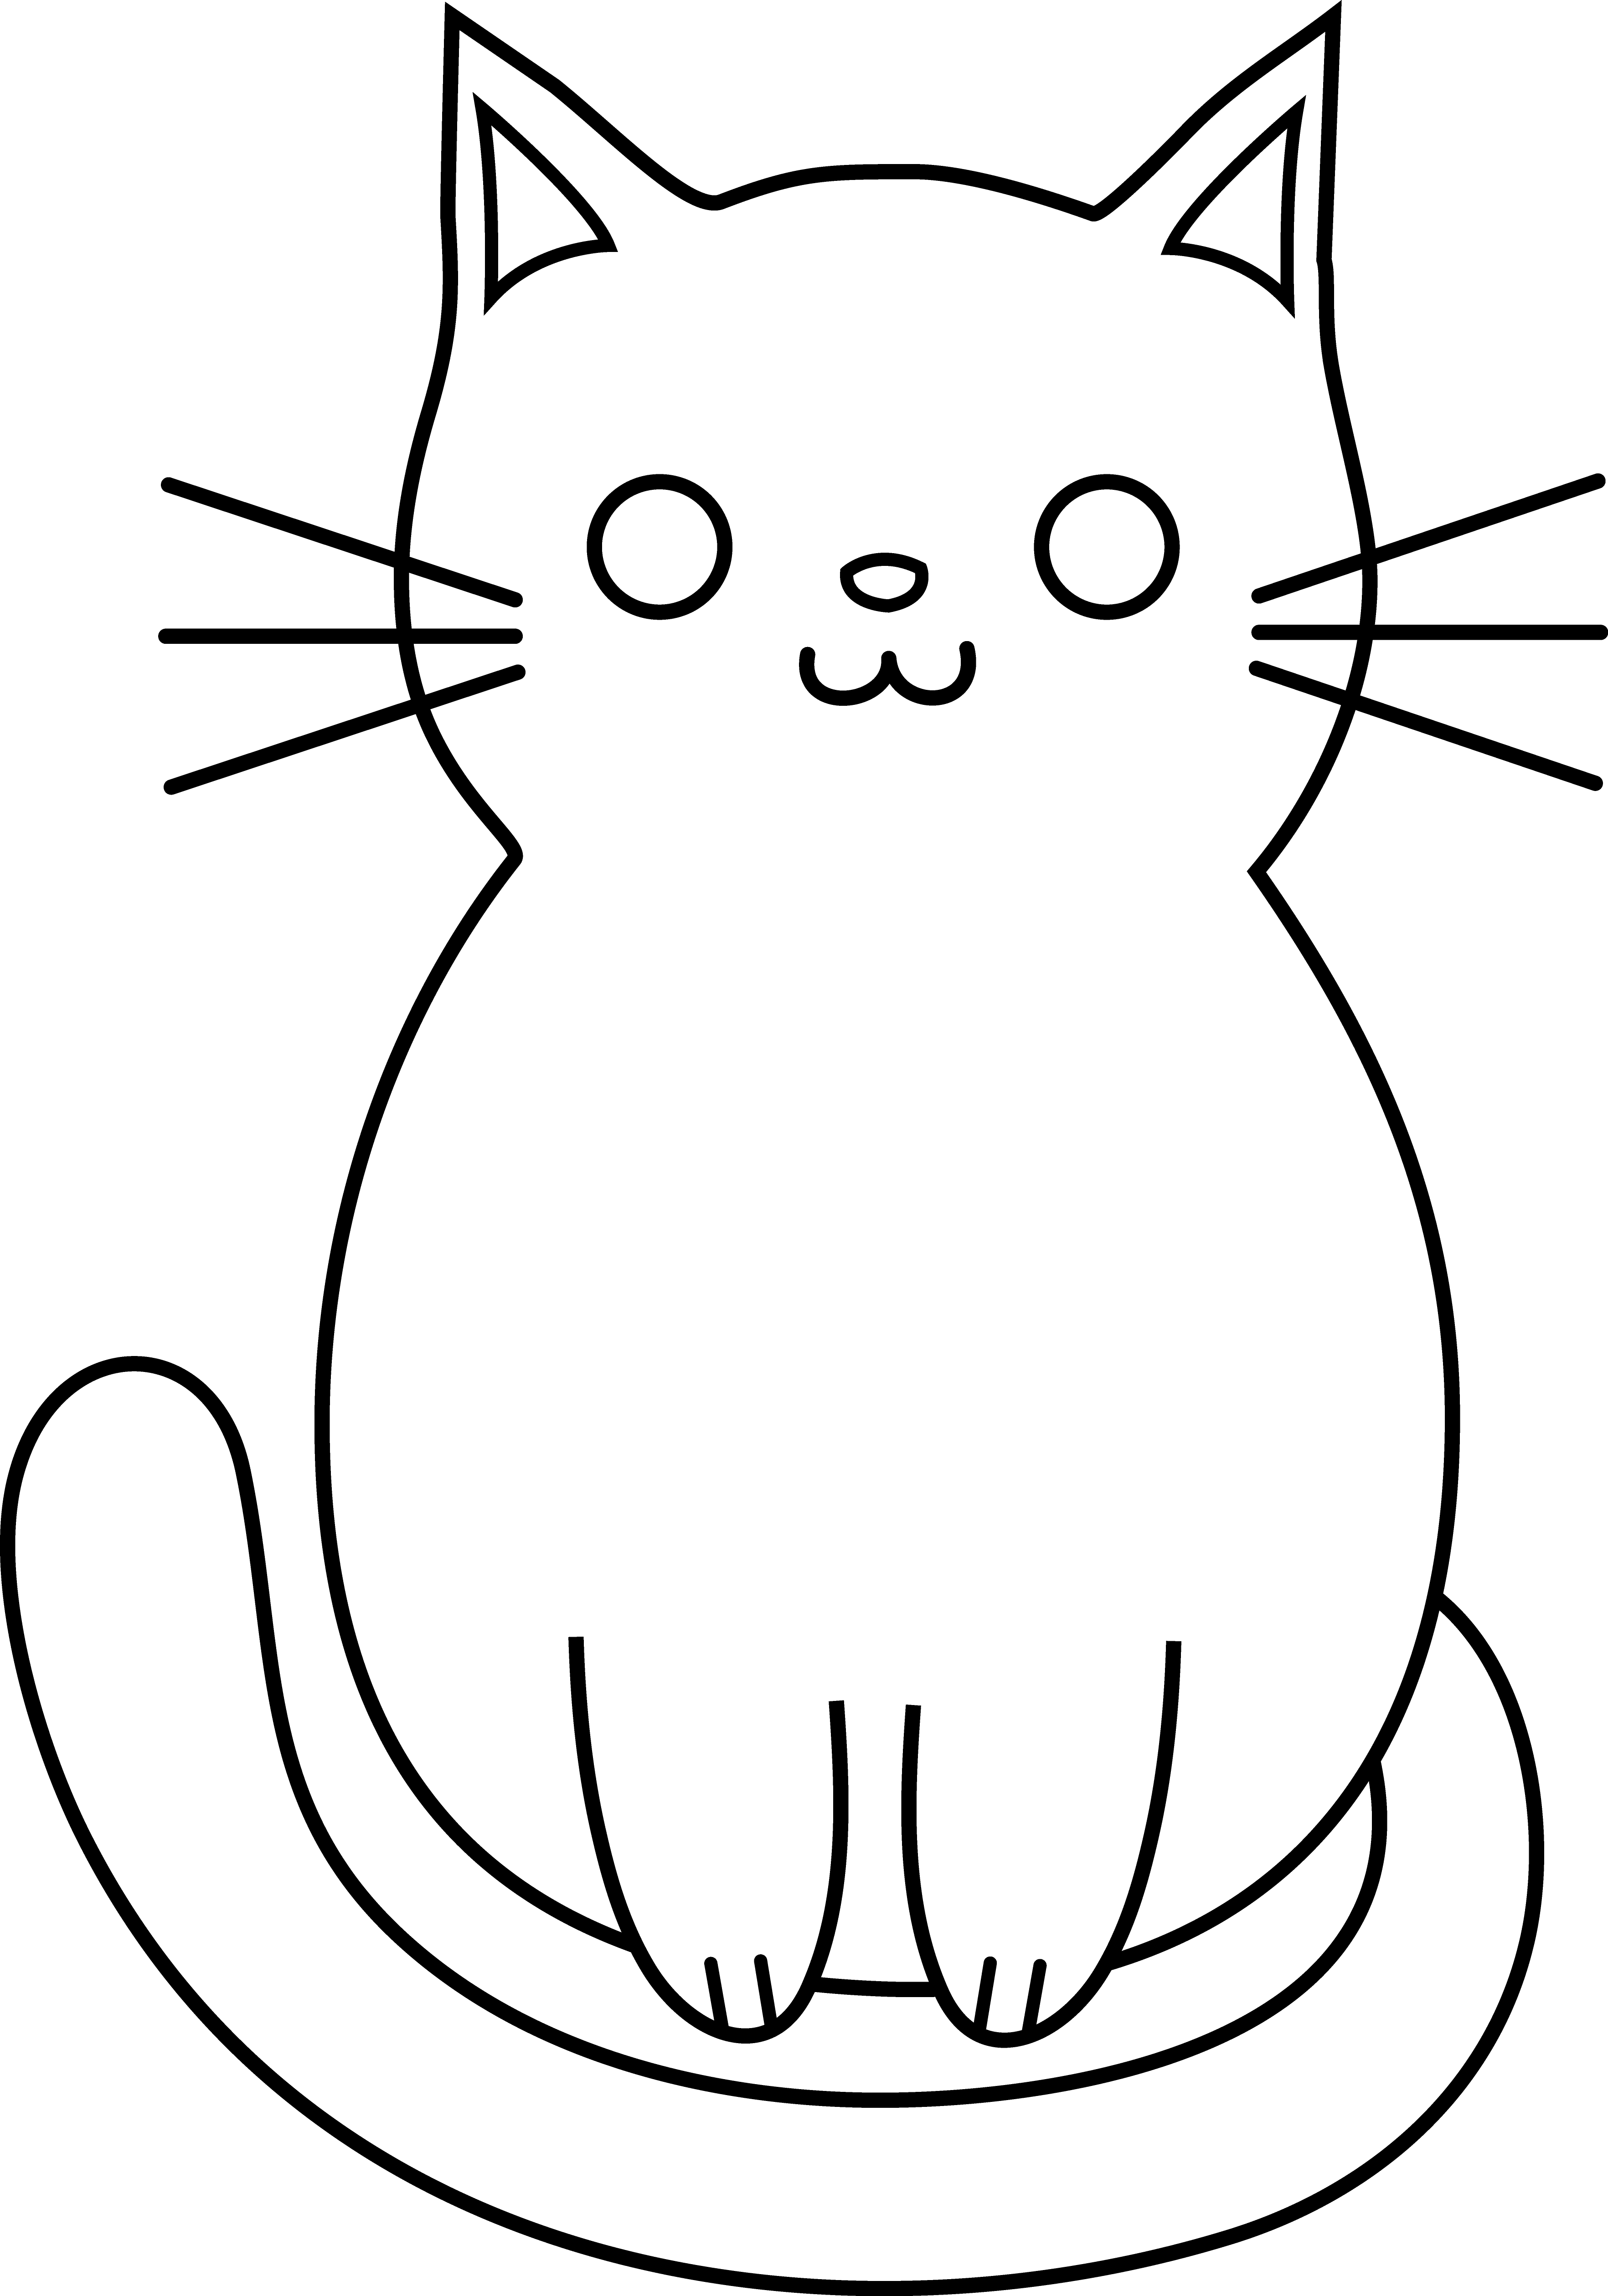 Free Pictures Of Cartoon Kittens, Download Free Clip Art